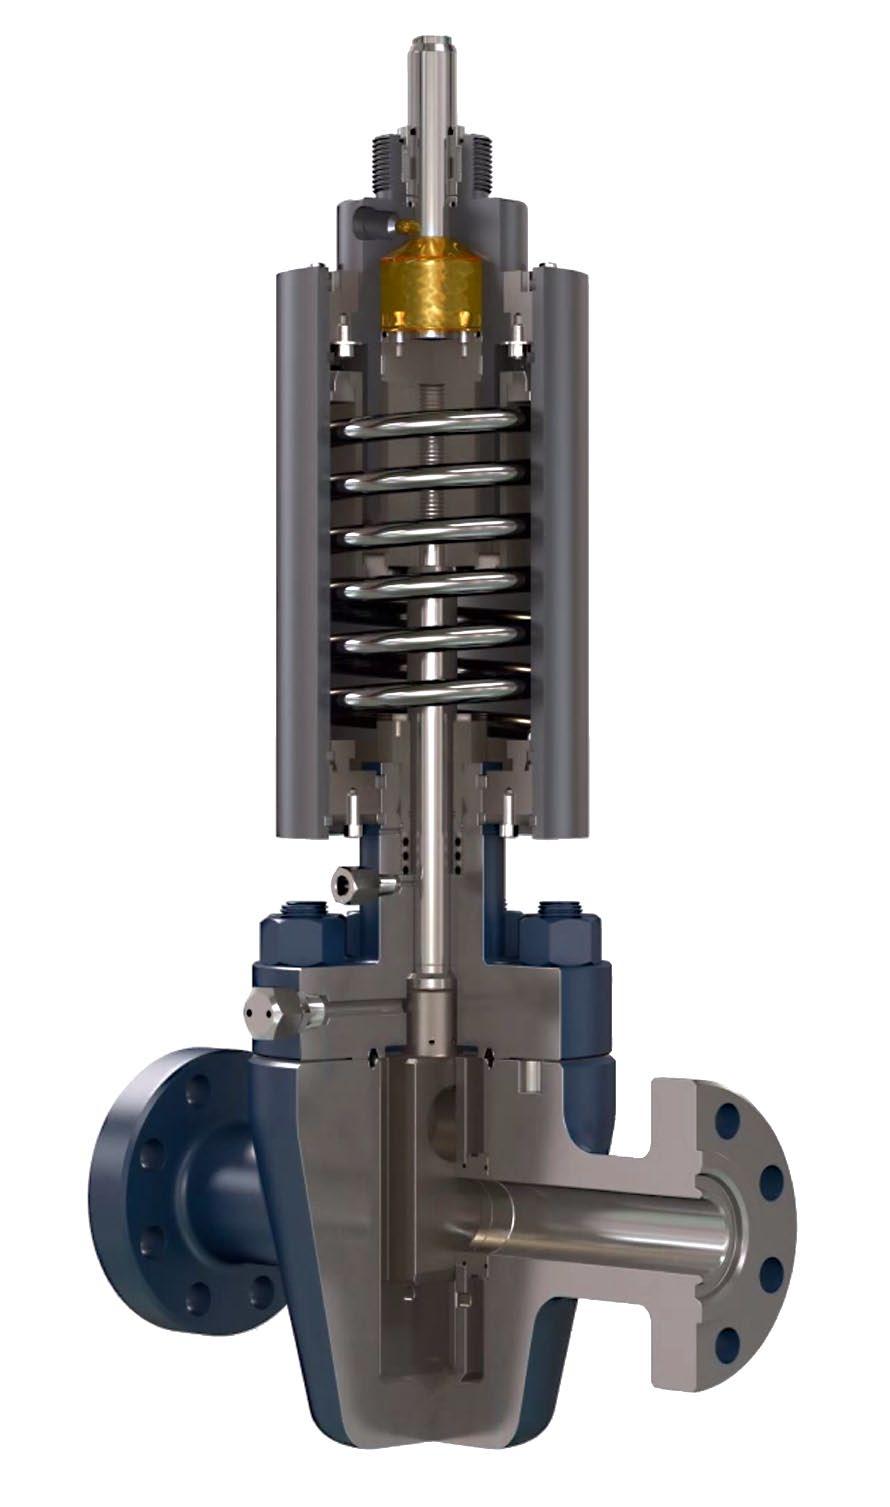 MODEL HX Fail Safe Hydraulic Actuator FEATURES Flexibility Model HX actuators can be adapted to operate valves from any manufacturer (interface information is required) and can be delivered with